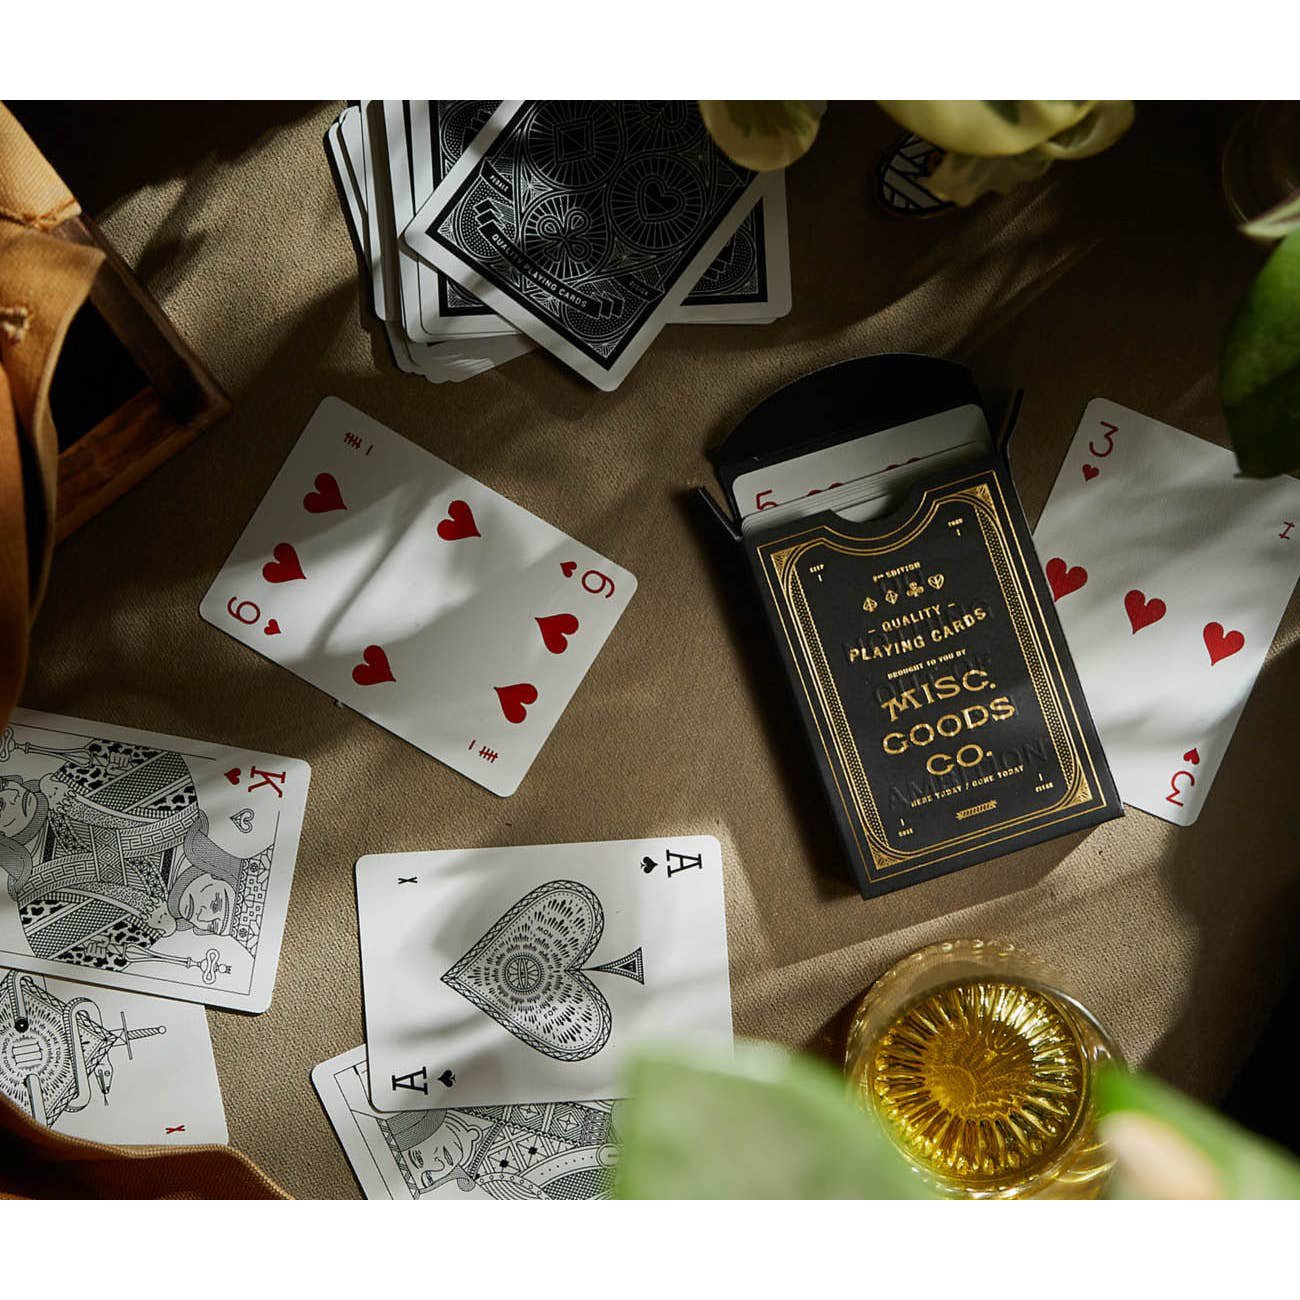 Misc. Goods Co. Premium Playing Cards - Black - GLADFELLOW